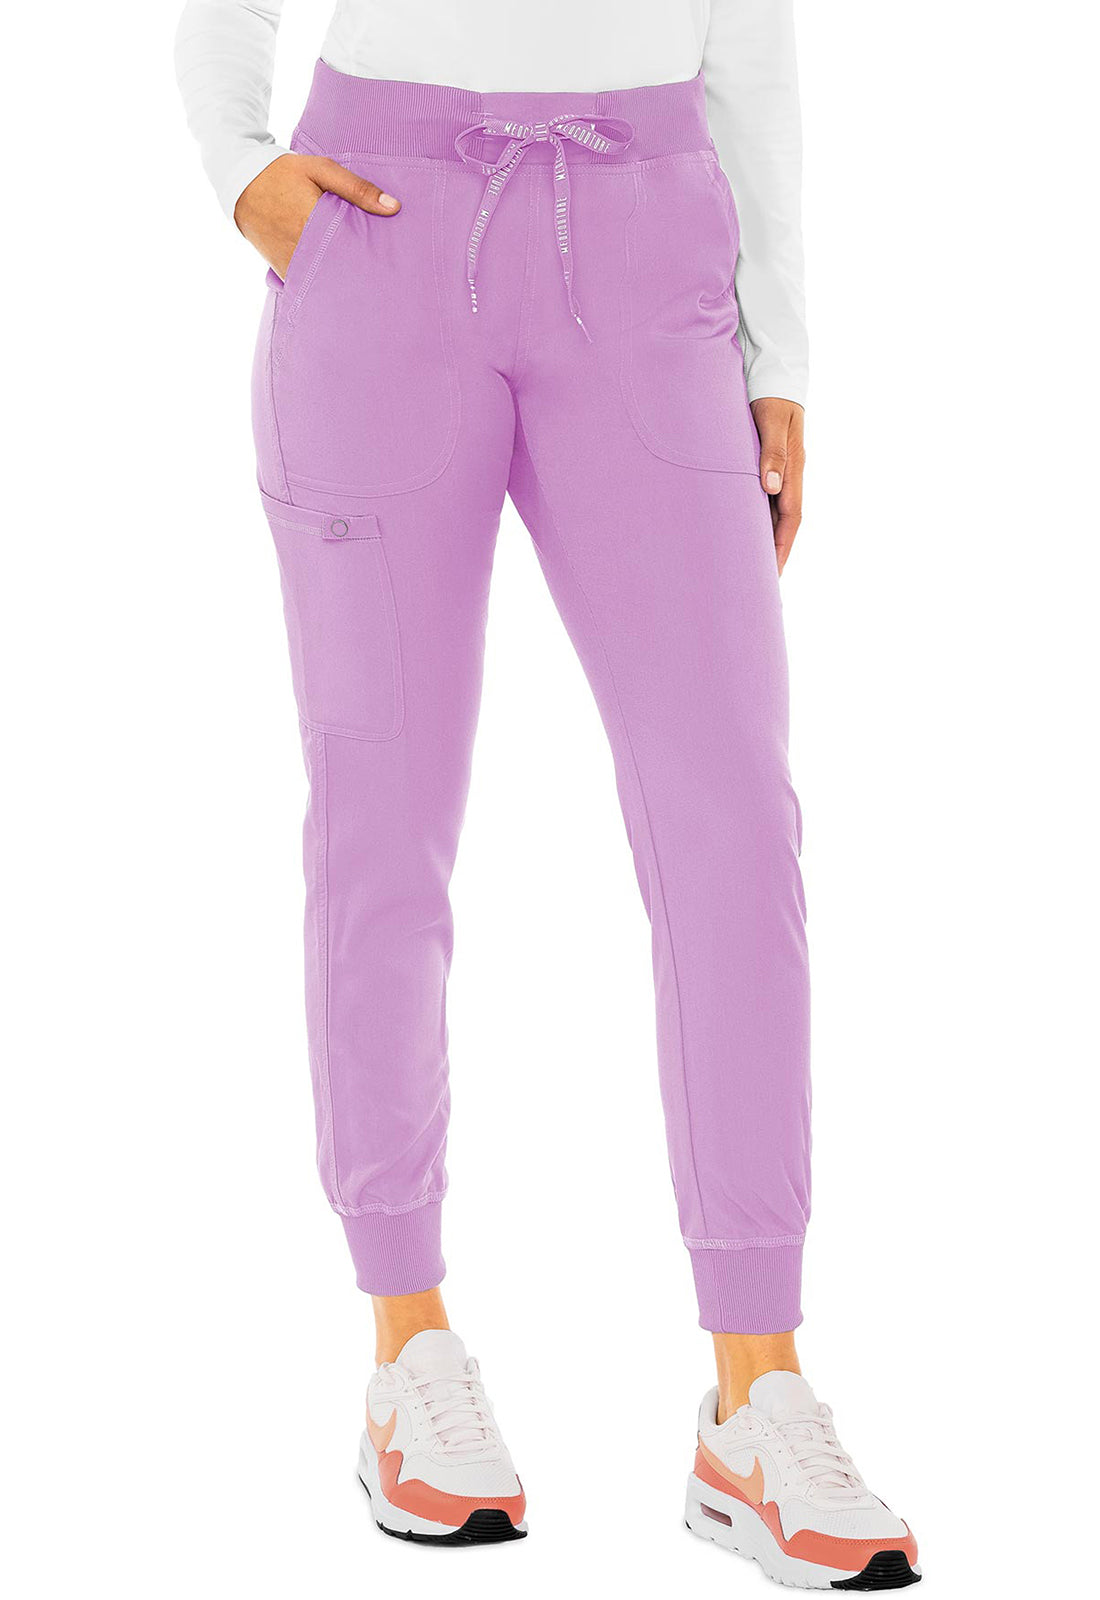 Med Couture Touch Jogger Yoga Pants